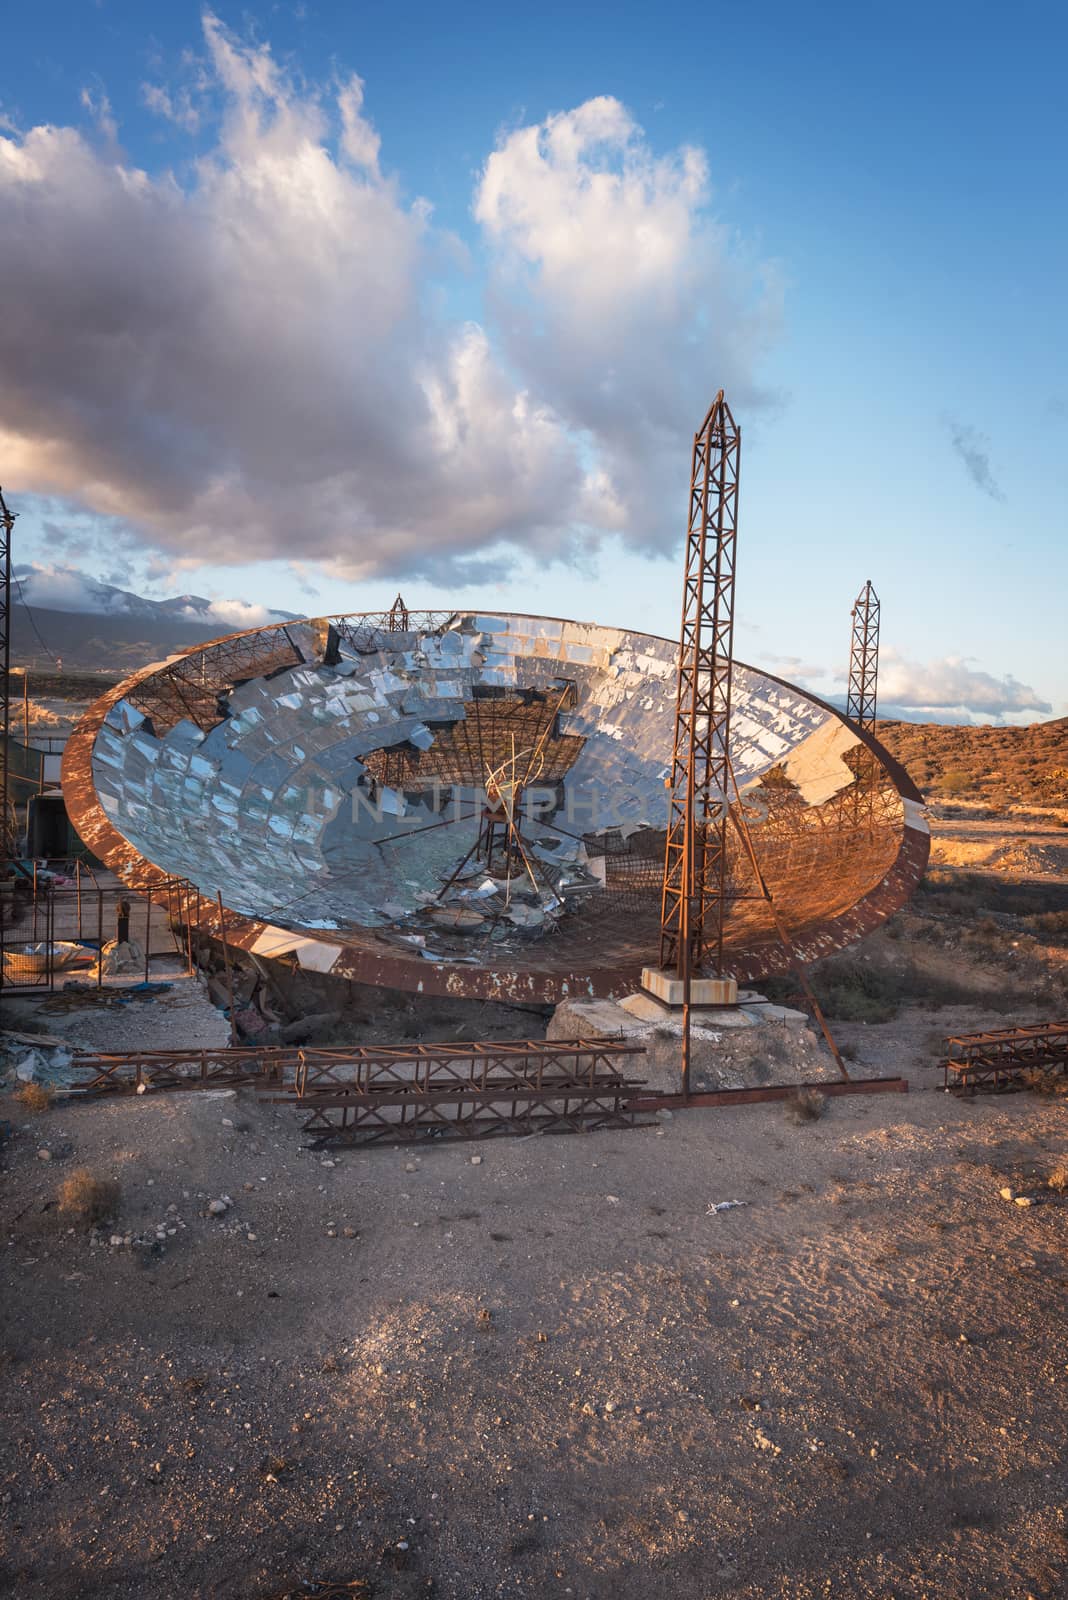 Ruined setellite dish antenna in south Tenerife, Canary islands, by HERRAEZ